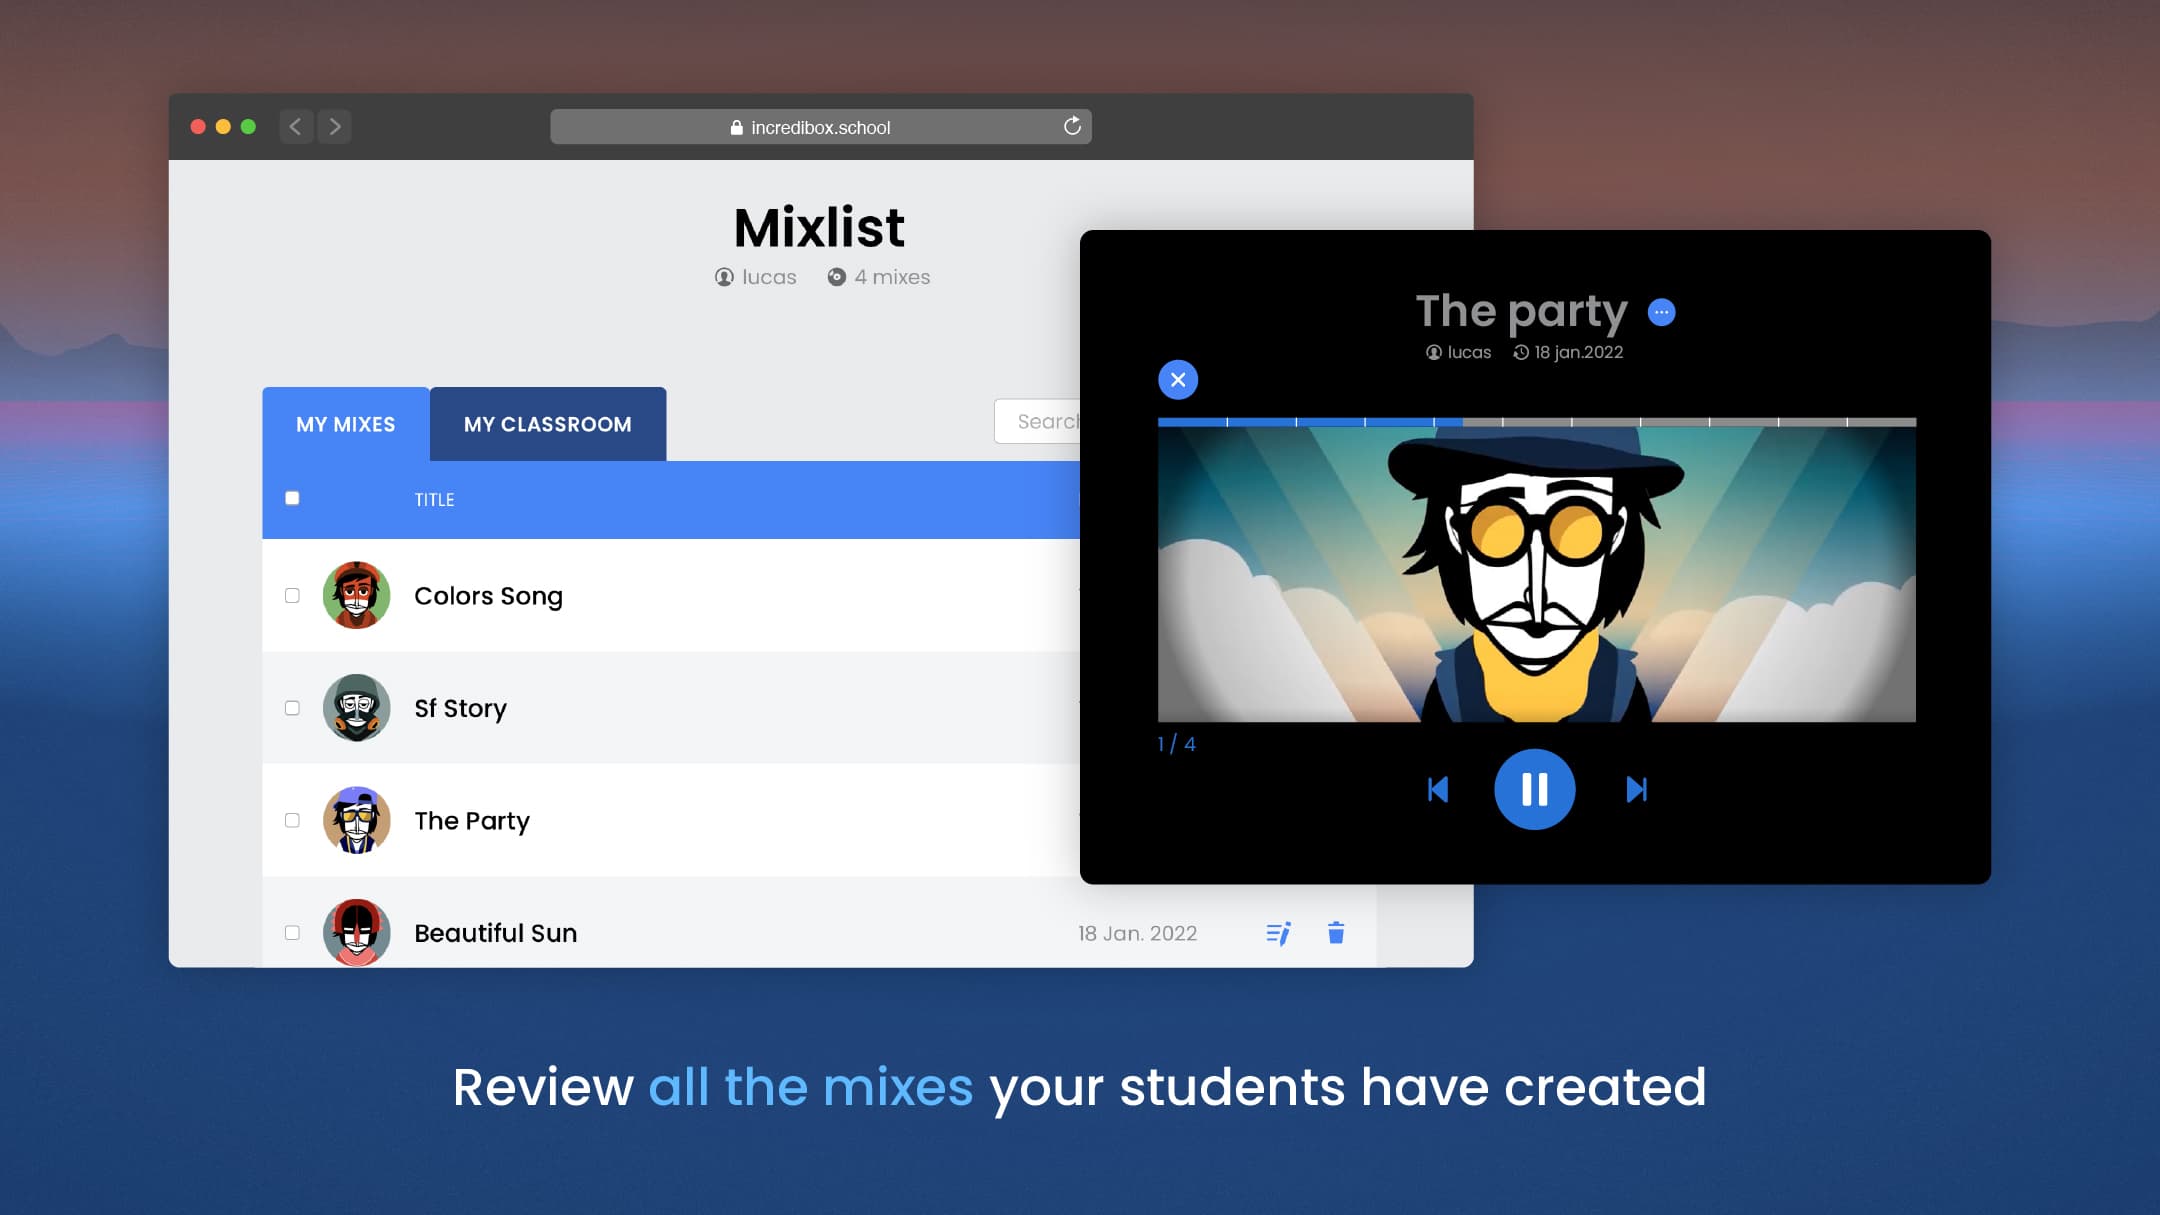 Review your students' mixes - Incredibox for schools